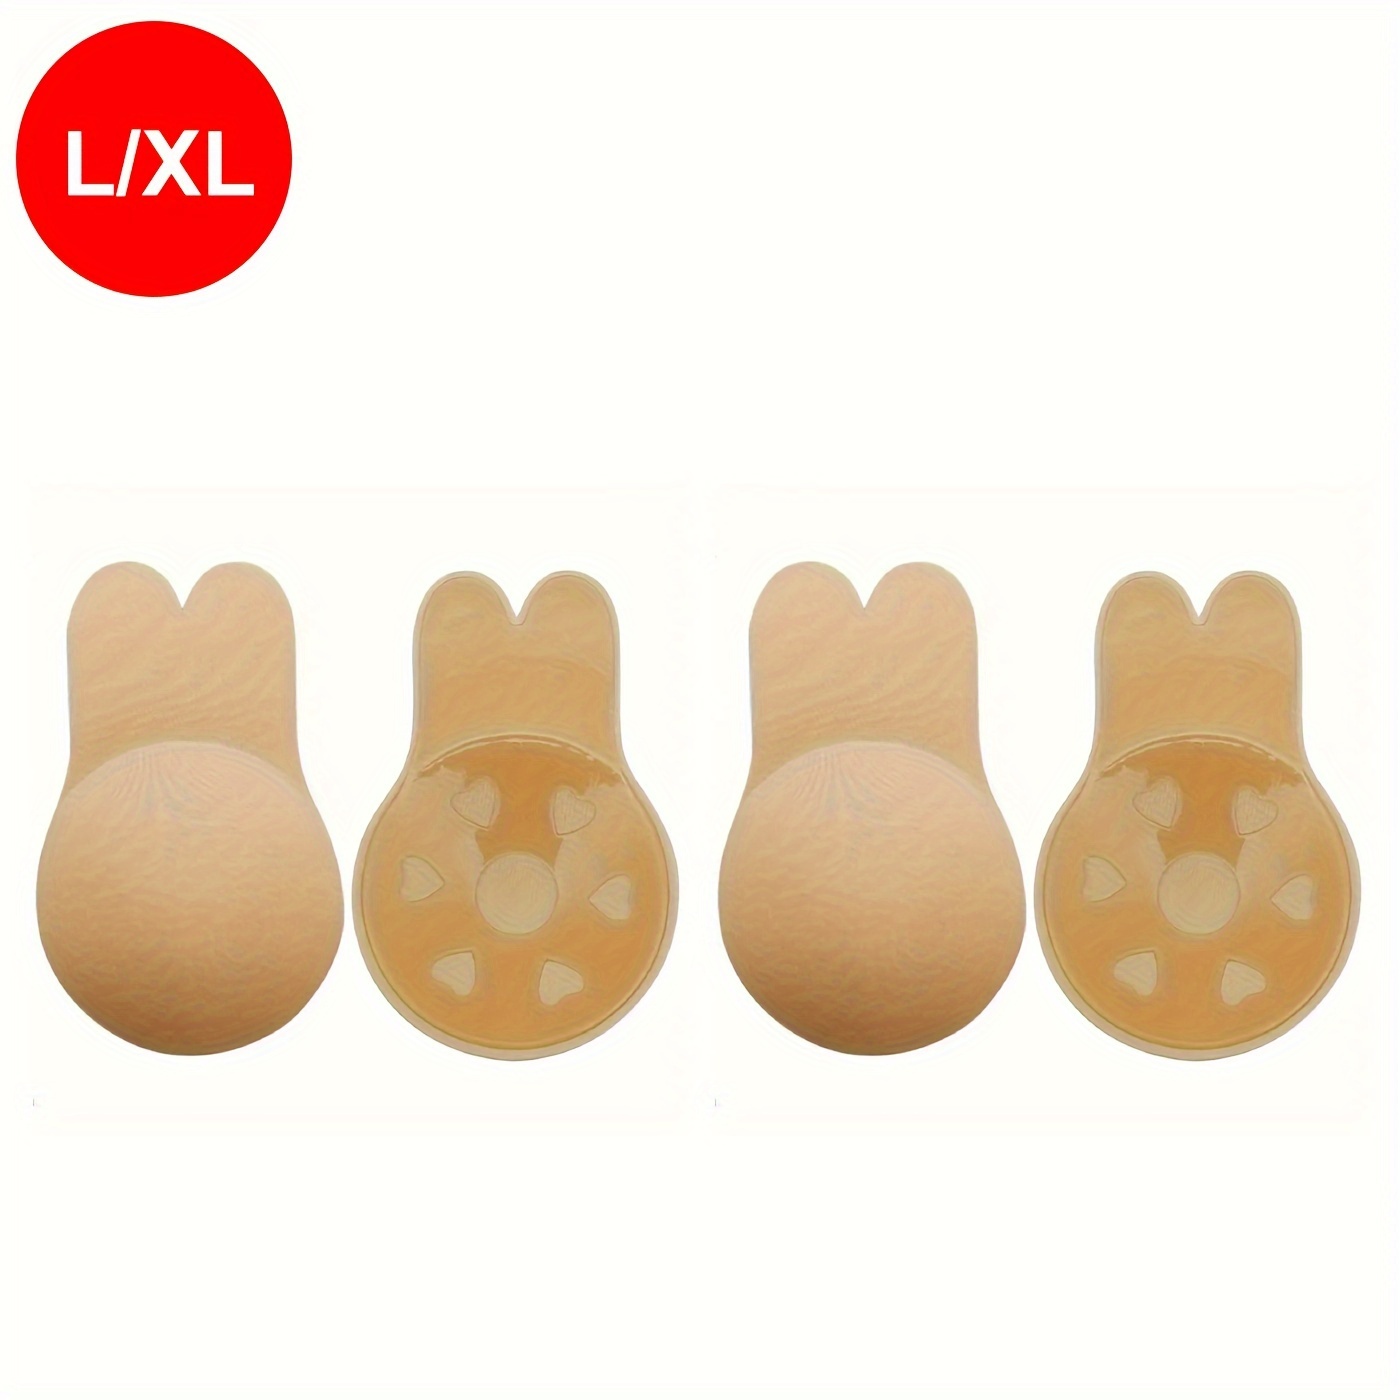 Women Intimates Accessories Push Up Bras Self Adhesive Silicone Strapless Invisible  Bra Reusable Sticky Breast Lift Tape Rabbit Nipple Cover Bra Pads From  Jacky0817, $2.37